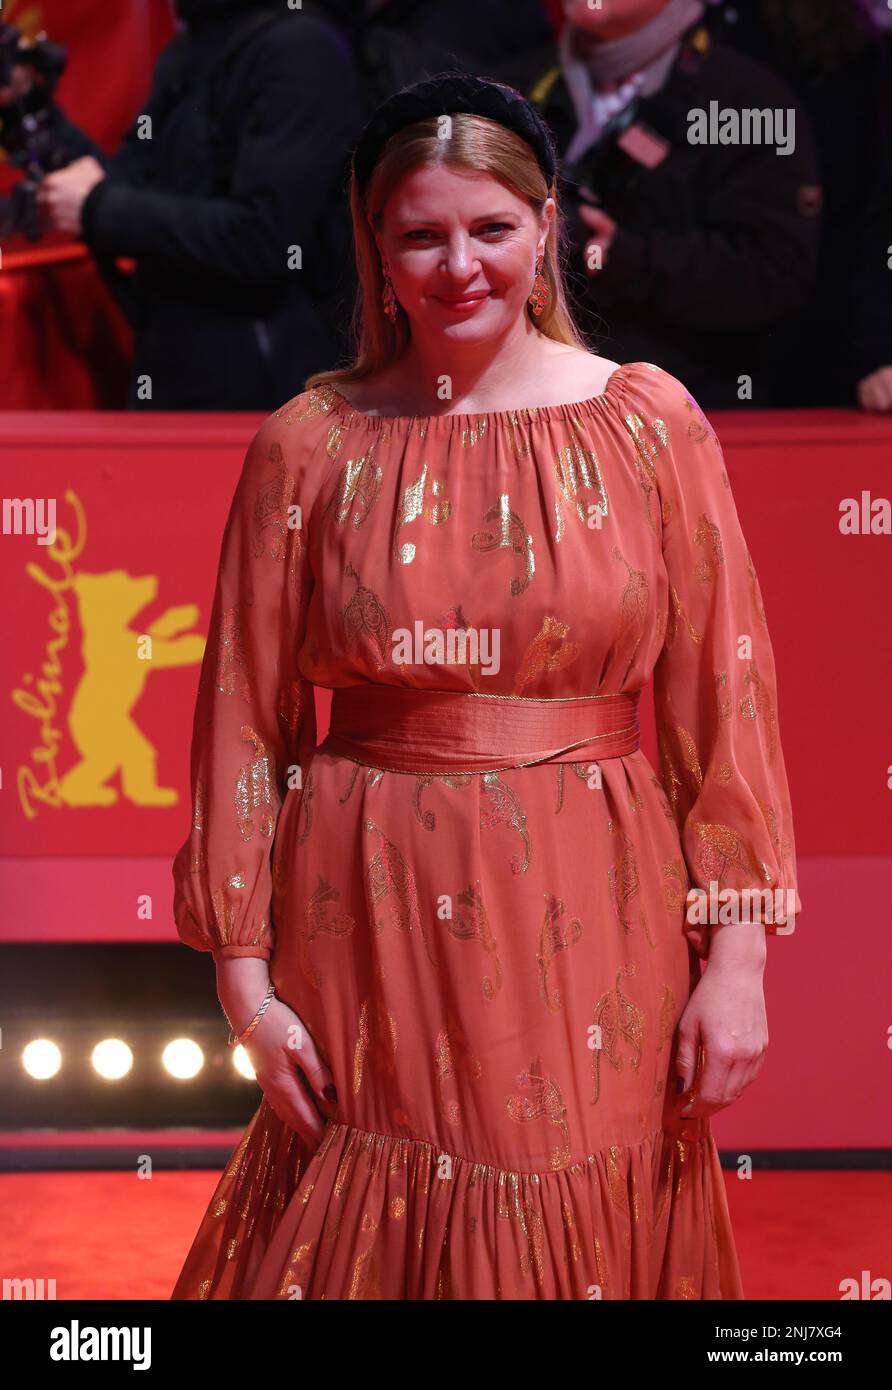 Berlin, Germany. 17th February 2023. Jördis Triebel at the premiere gala screening for the film Someday We’ll Tell Each Other Everything (Irgendwann Werden Wir Uns Alles Erzählen) at the 73rd Berlinale International Film Festival, Berlinale Palast. Credit: Doreen Kennedy/Alamy Live News. Stock Photo